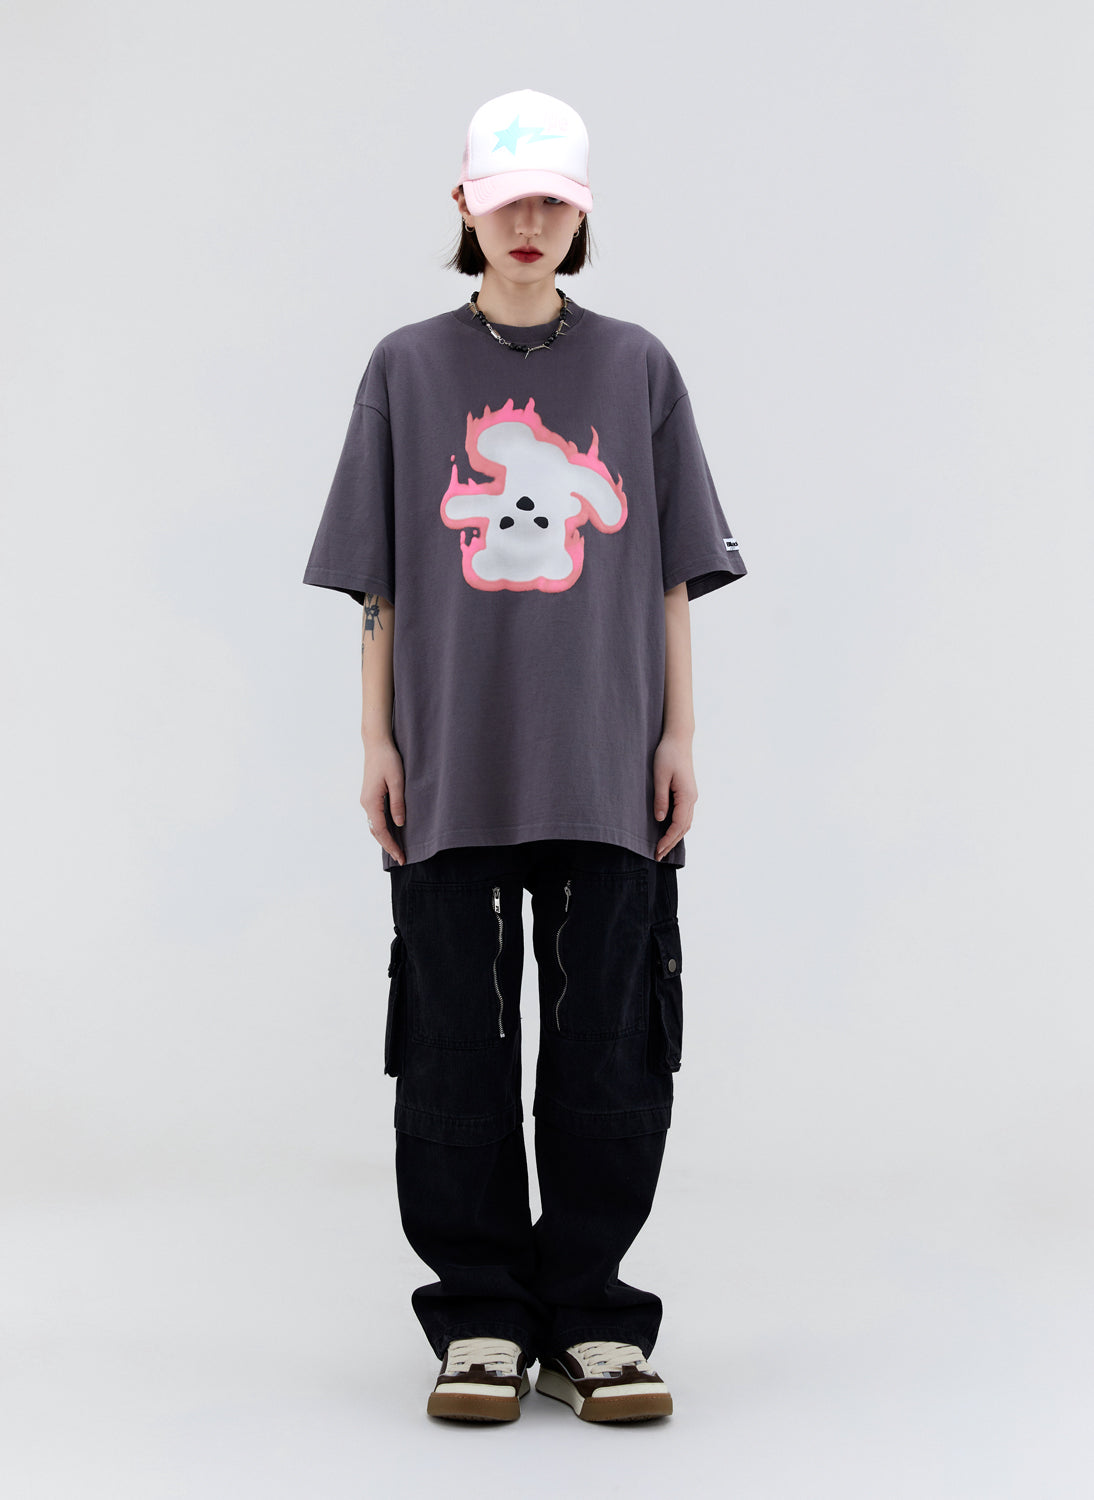 LONELY BEAR T-SHIRT